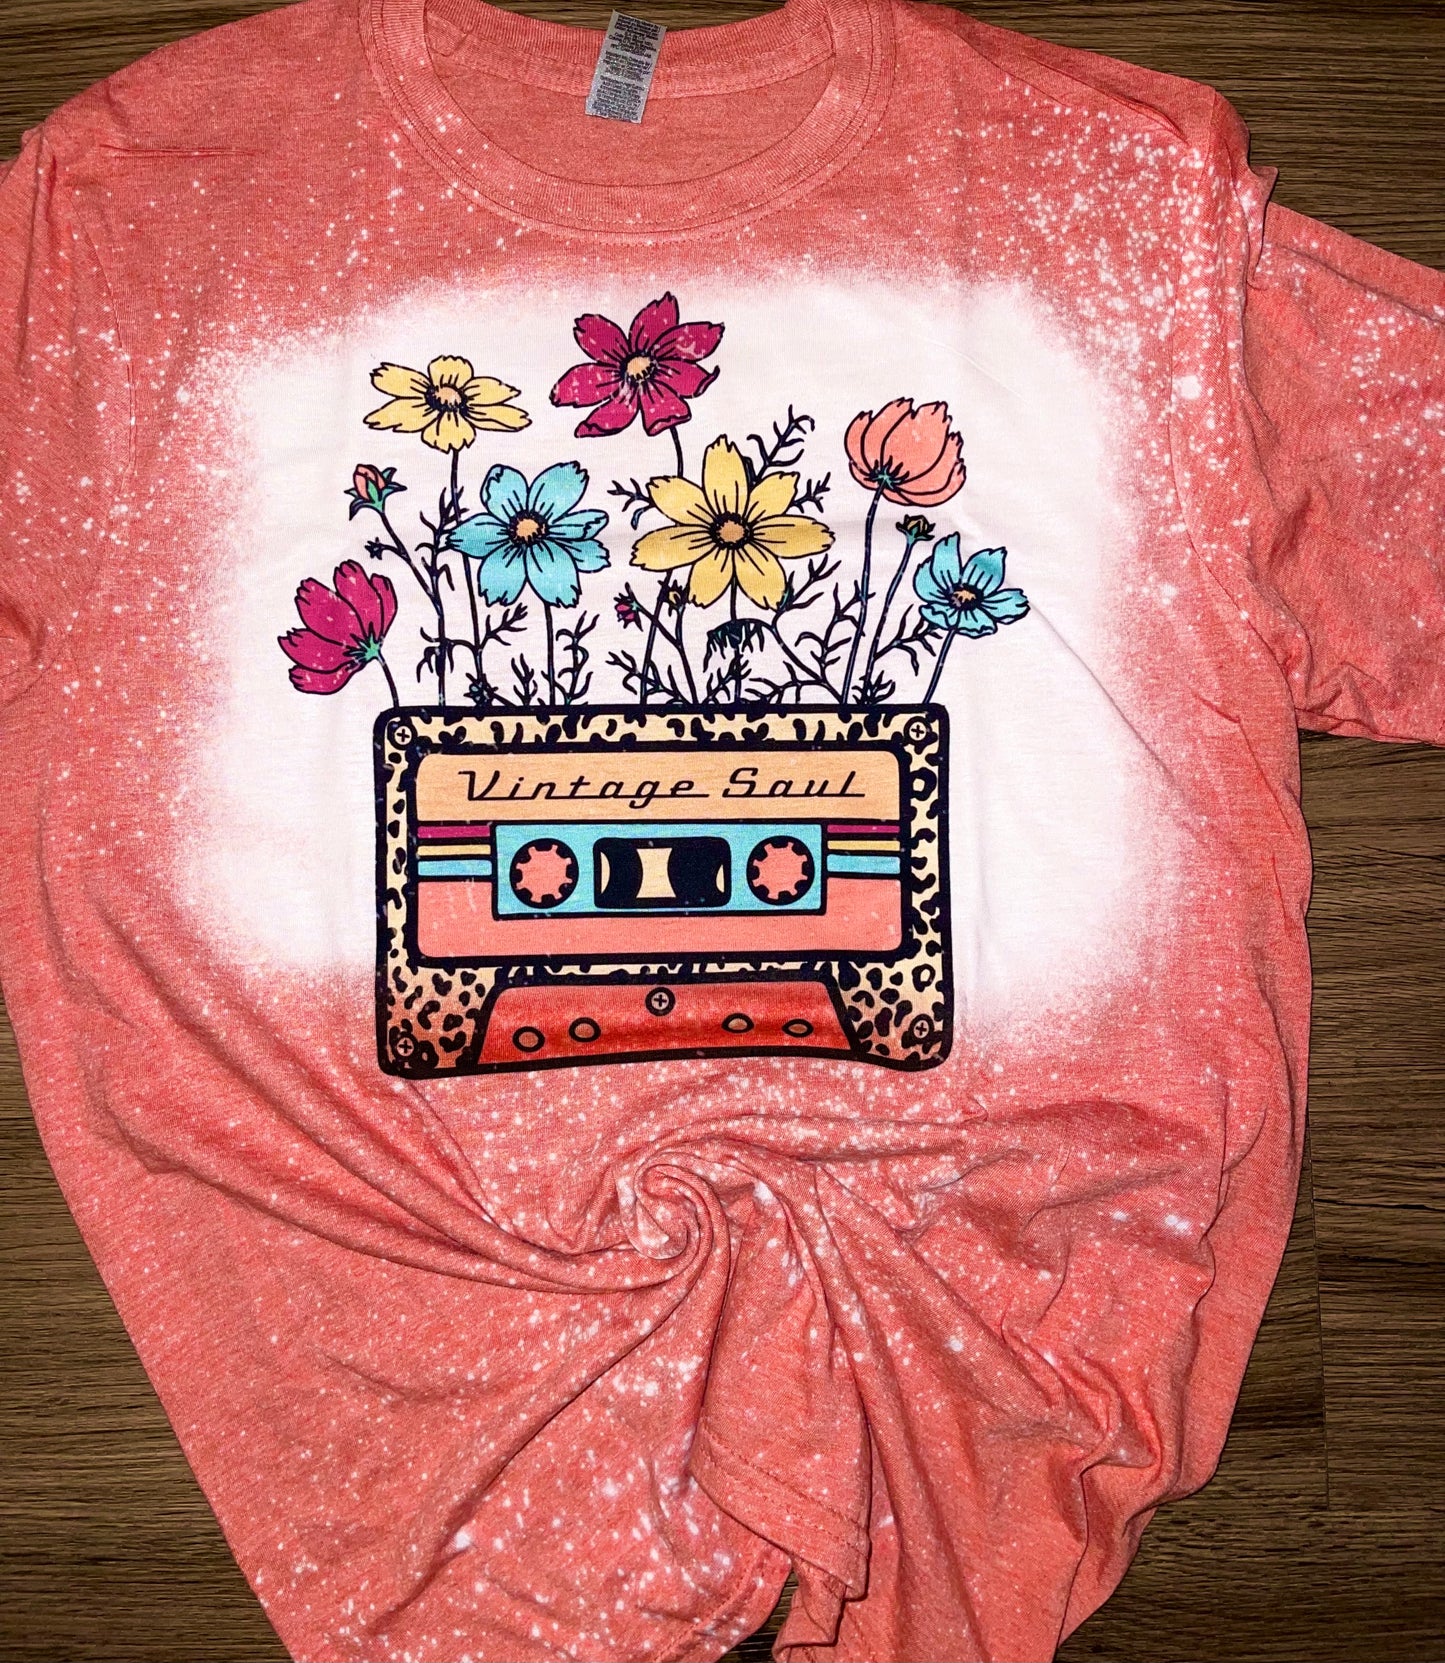 Product details  Custom sublimated tee that reads “vintage soul” Pressed on a soft style gildan  Short sleeve  Fits true to size Contact us about a custom color shirt.   *Colors may vary slightly due to monitor resolution and lighting*  Vintage Soul Tee Shirt Southern Bliss Boutique